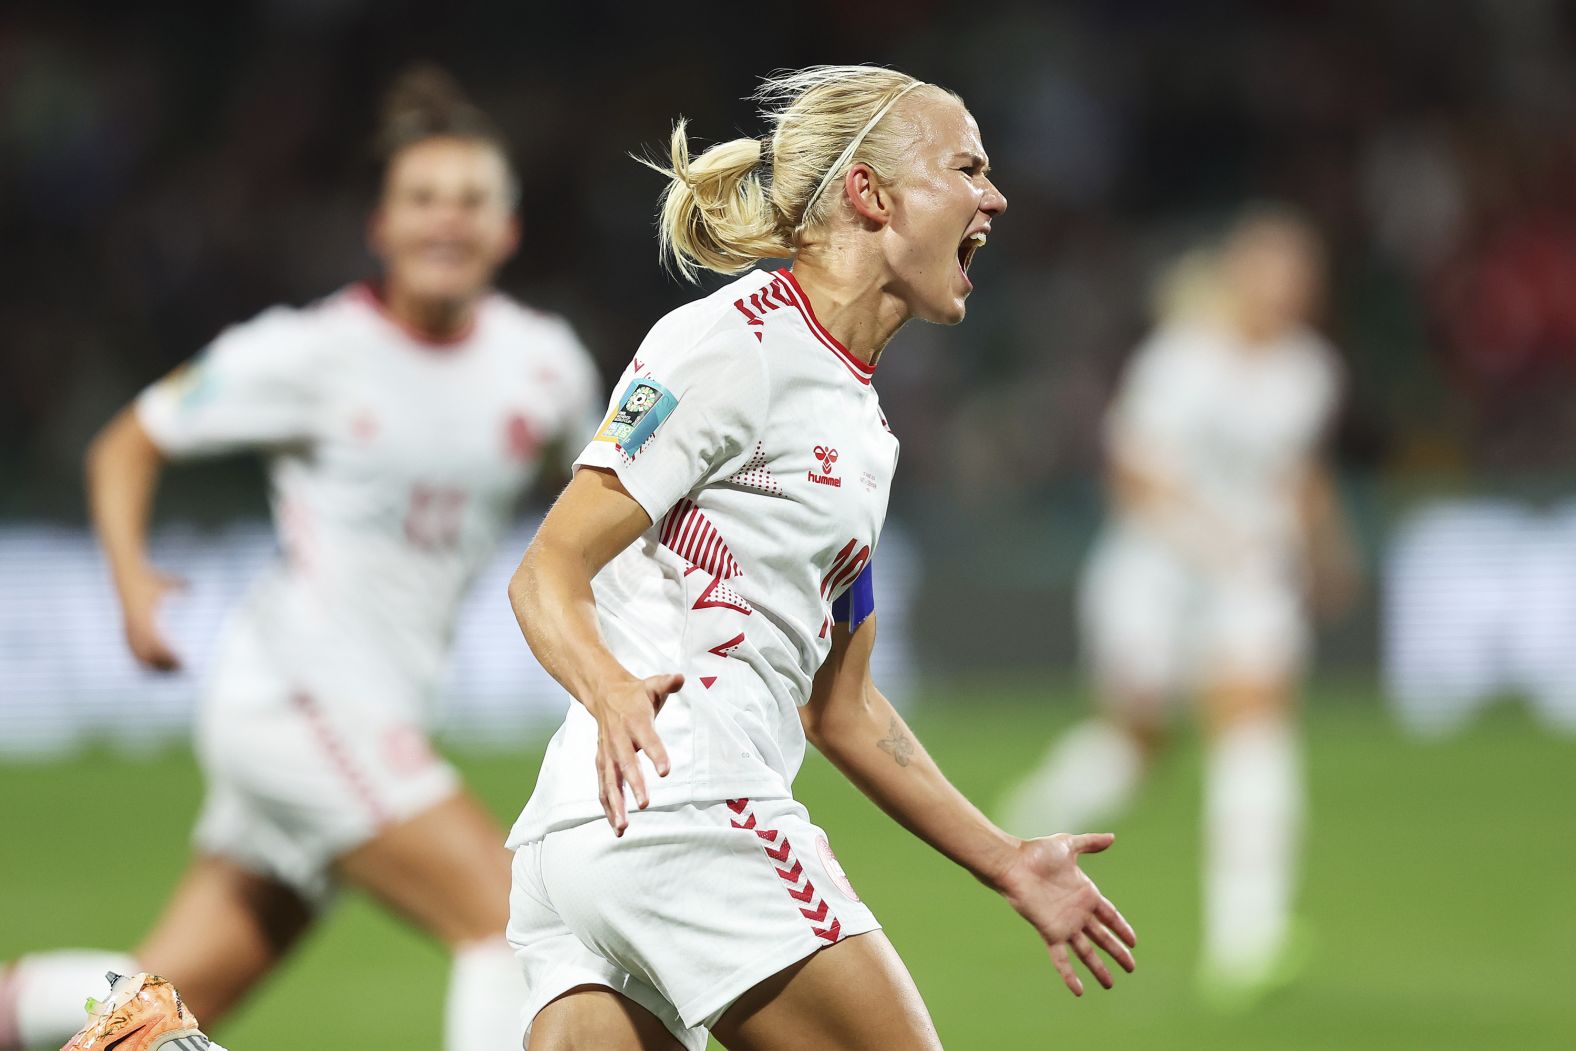 Pernille Harder celebrates after scoring the first goal of Denmark's 2-0 victory over Haiti on August 1. <a href="index.php?page=&url=https%3A%2F%2Fwww.cnn.com%2Fsport%2Flive-news%2Fuswnt-portugal-group-stage-womens-world-cup-08-01-23%2Fh_d2ec41756a8f7e49b2ca2590e3226d01" target="_blank">The win</a>, coupled with China's defeat against England, meant Denmark would advance to the knockout stage and face co-host Australia.